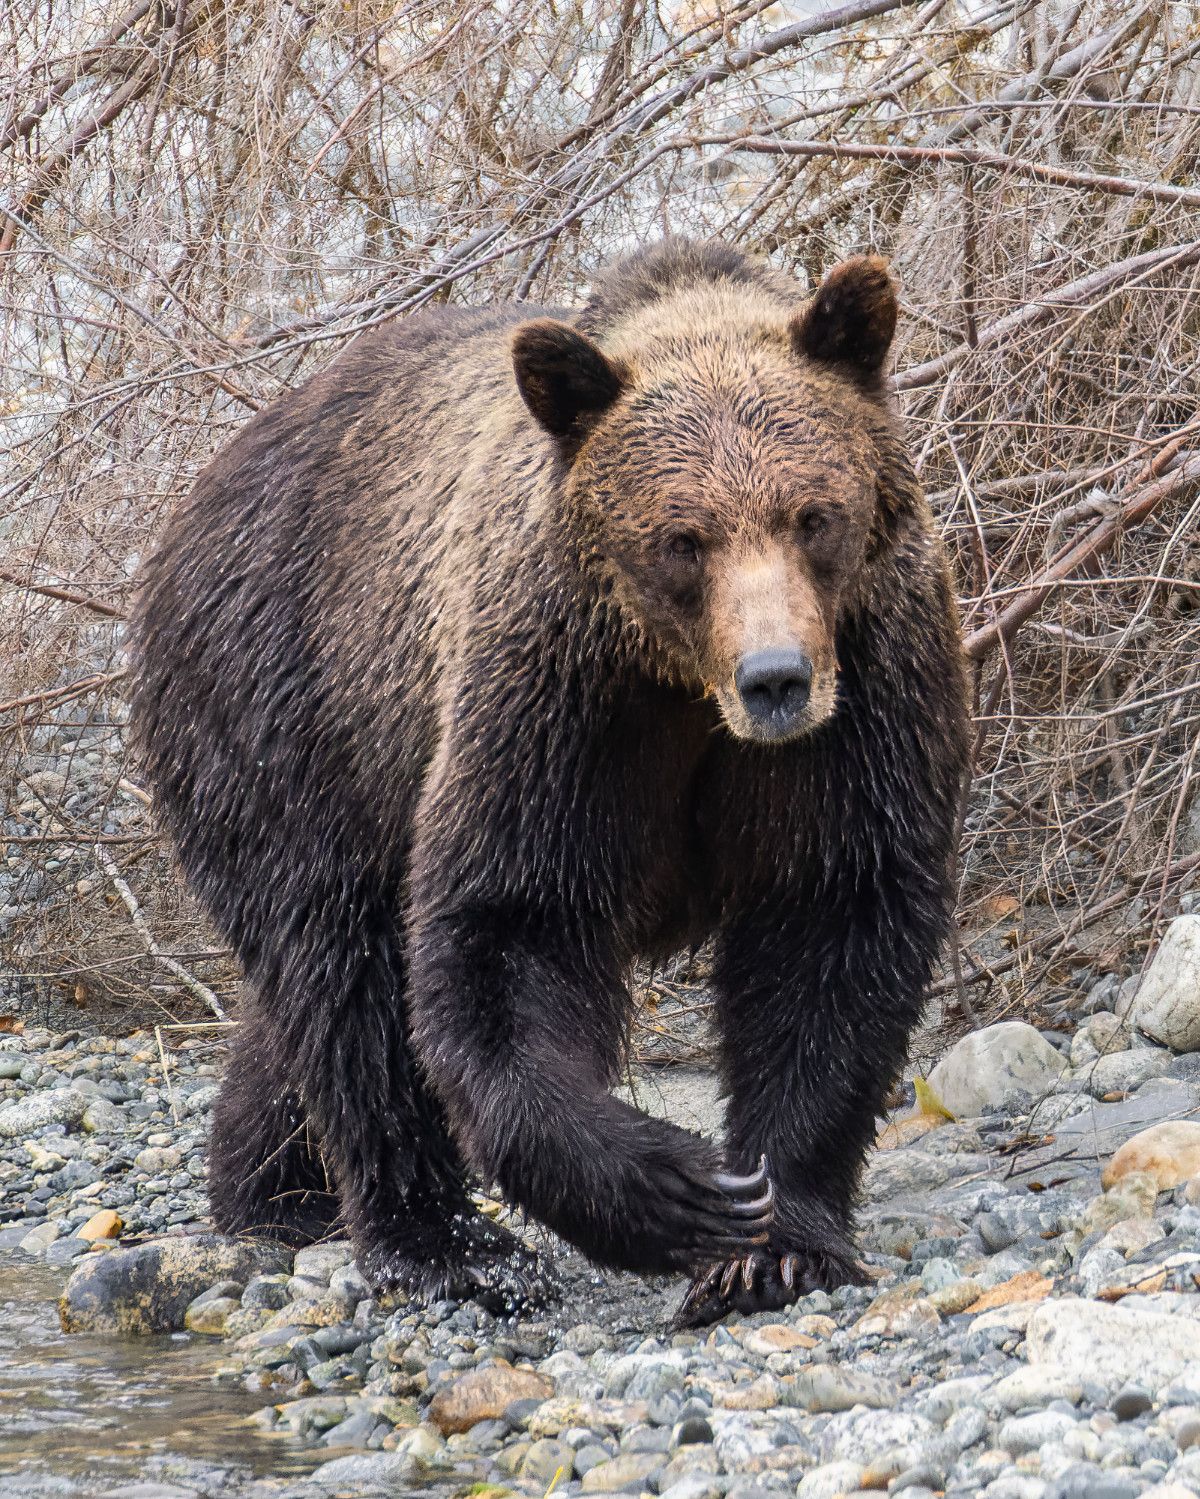 Image of a grizzly bear walking along the rocky riverside.